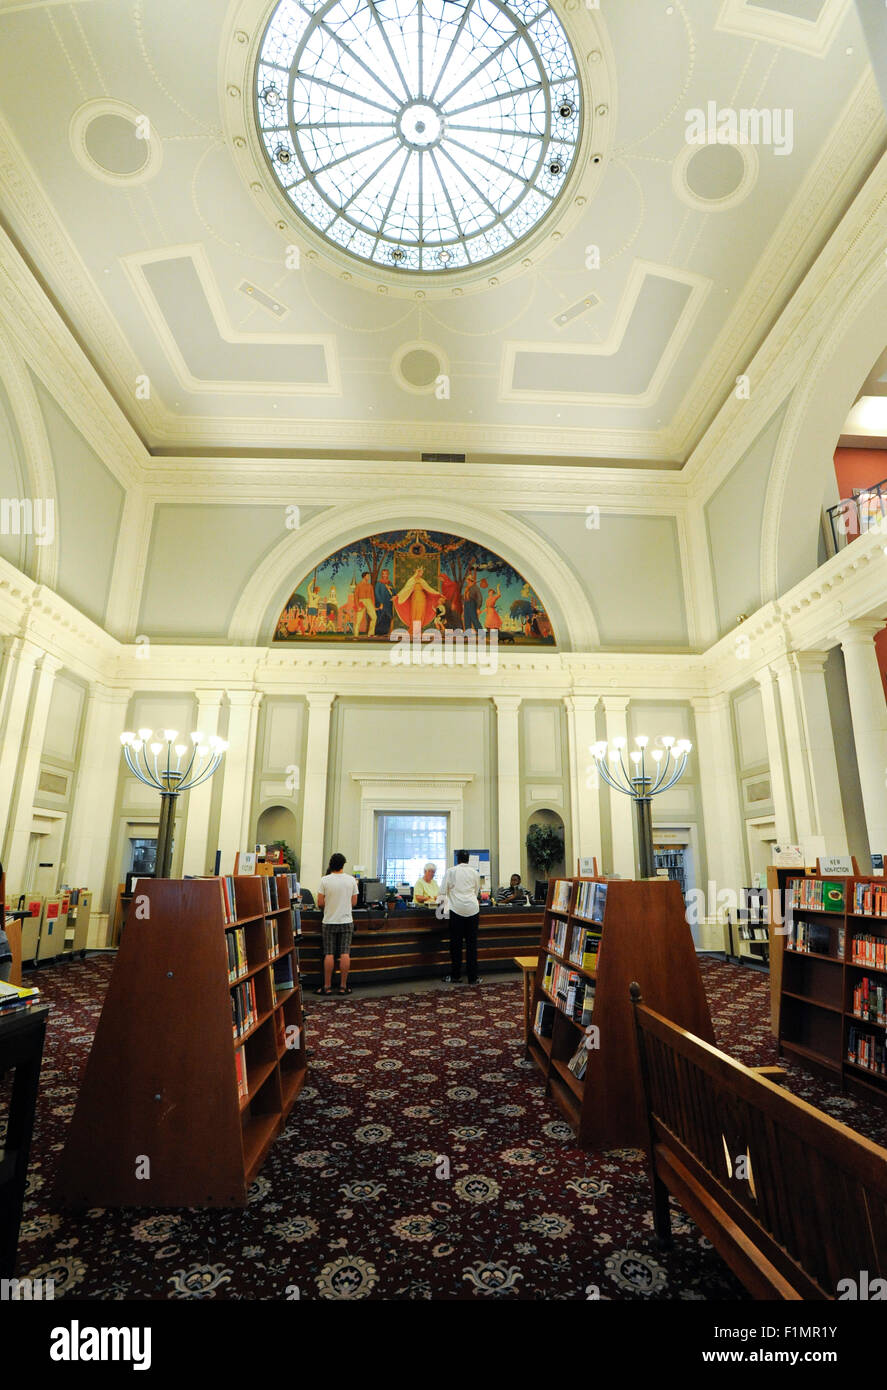 New Haven Free Public Library, New Haven, Connecticut. Lunette mural designed and painted by Bancel La Farge. Stock Photo